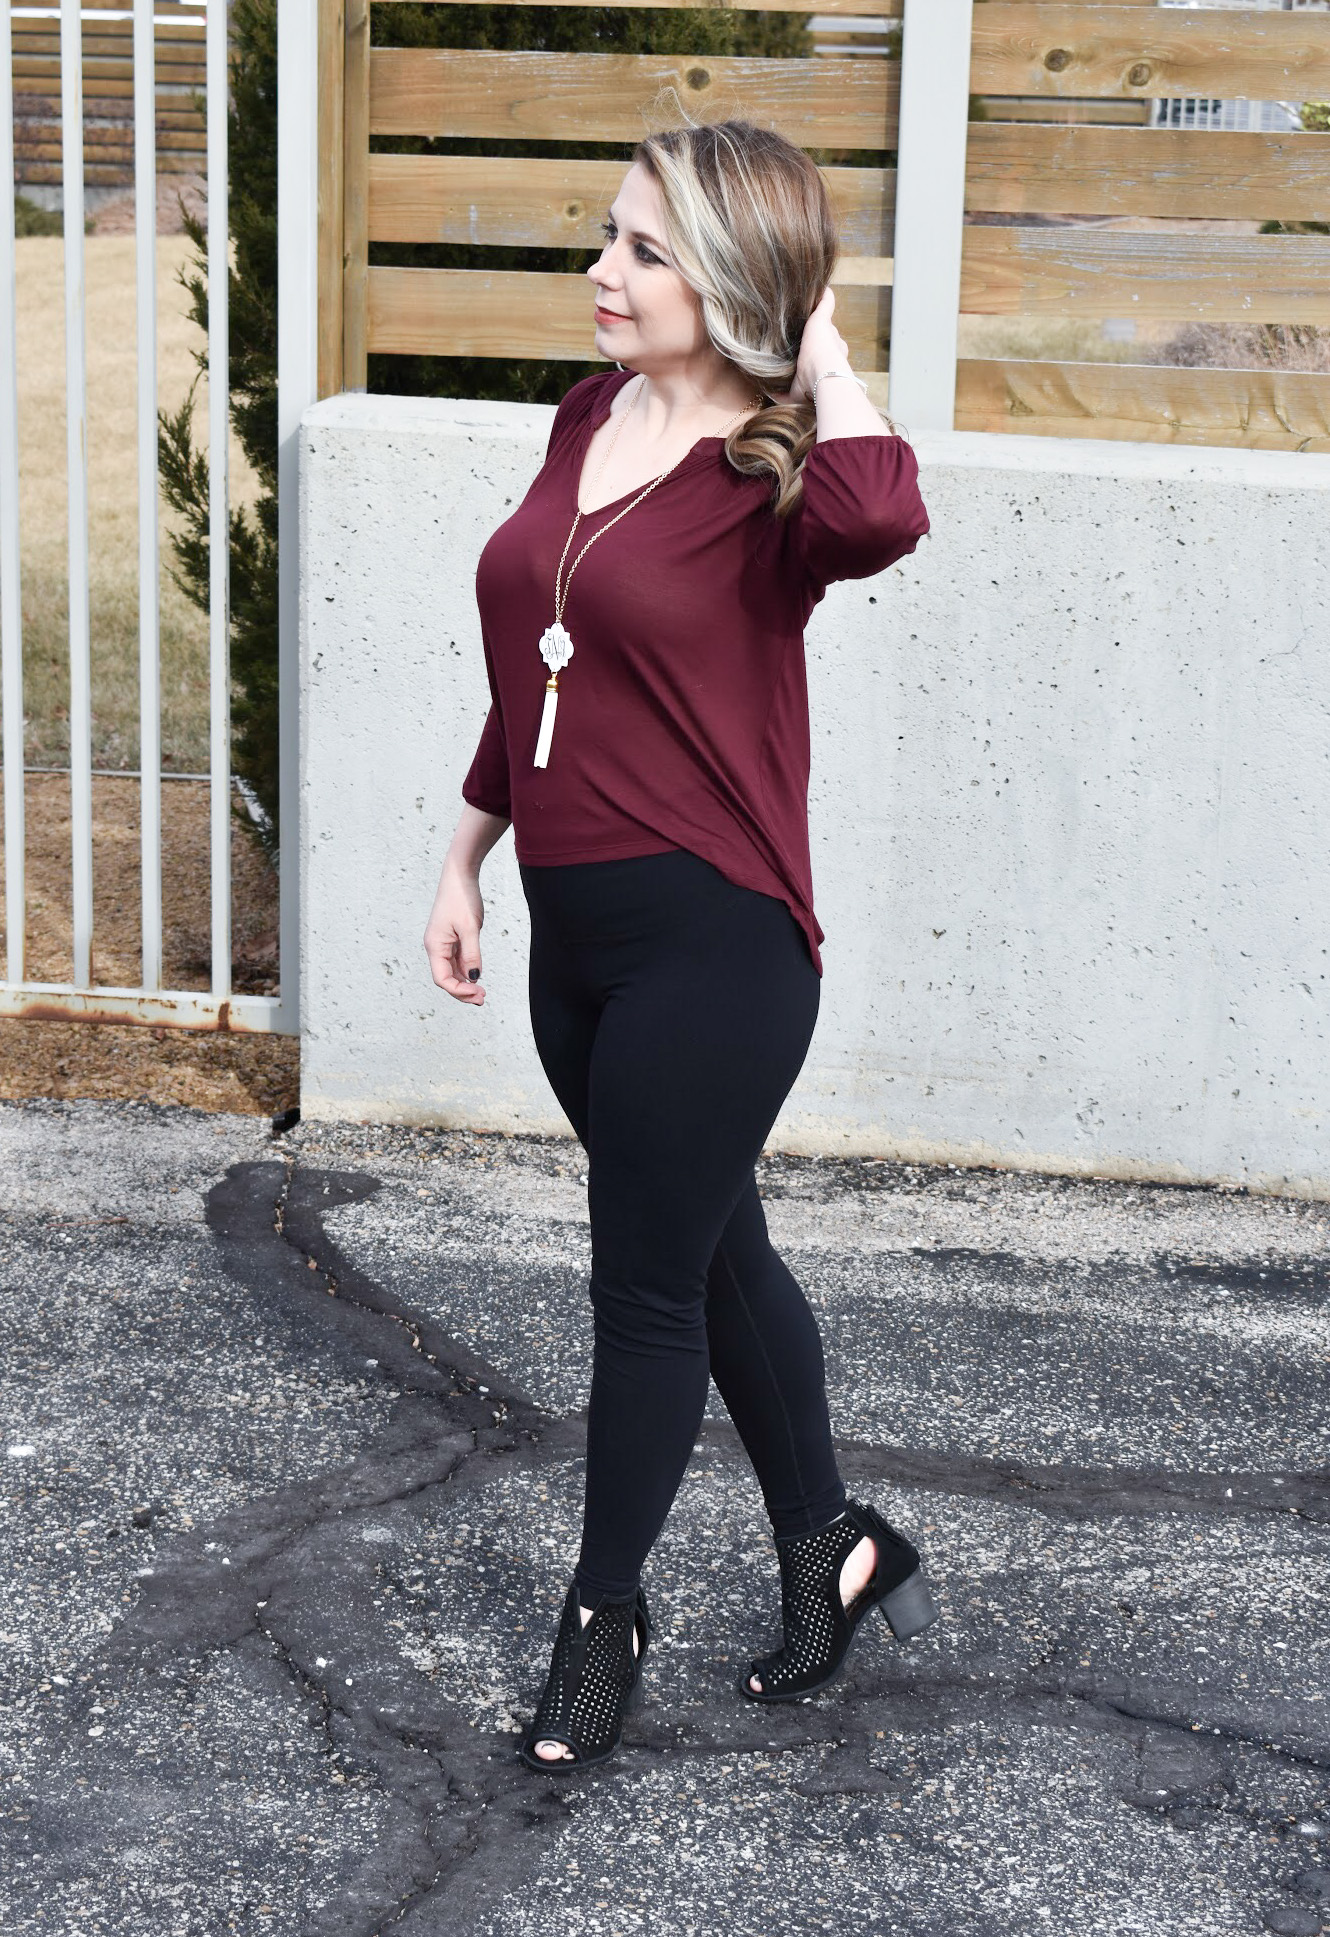 Leggings With a Dress (because...winter) - The Mom Edit